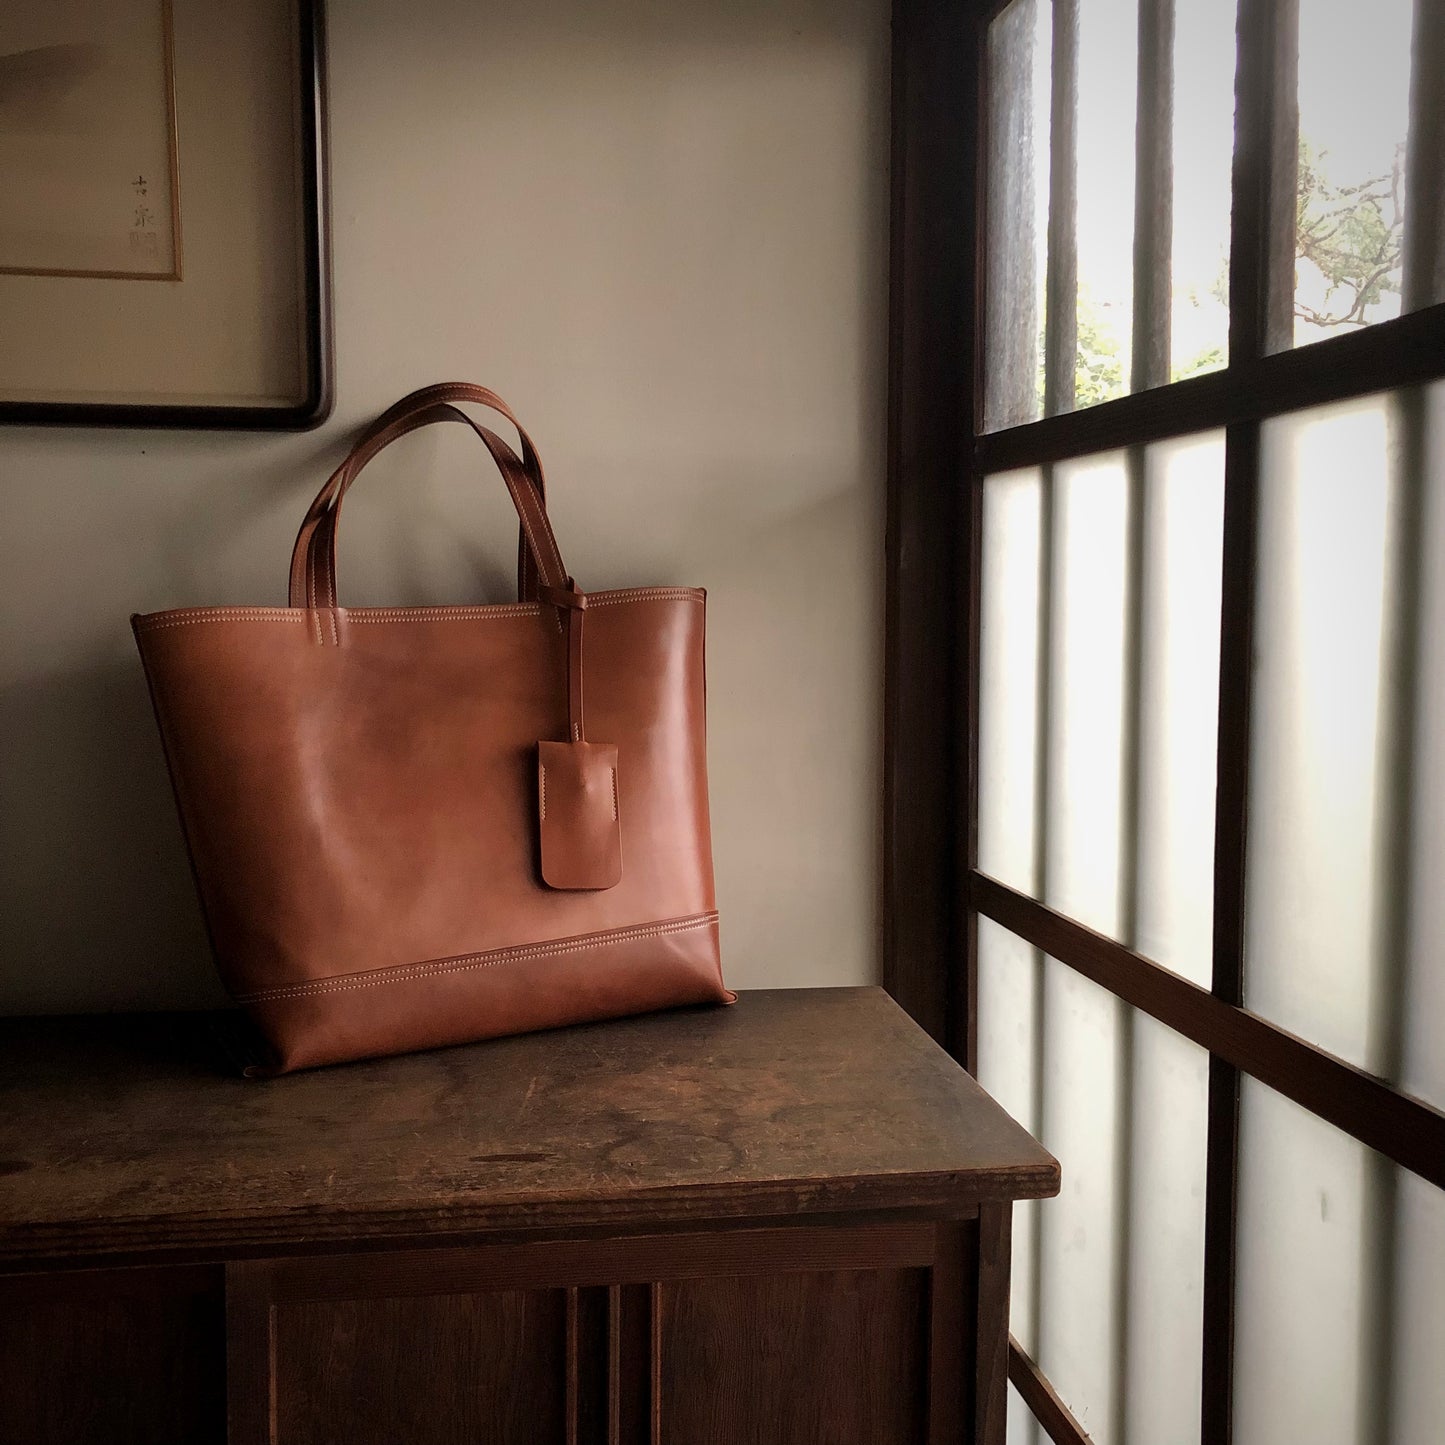 Shell Bag / Tote【Horween】シェルコードバンのトートバッグ